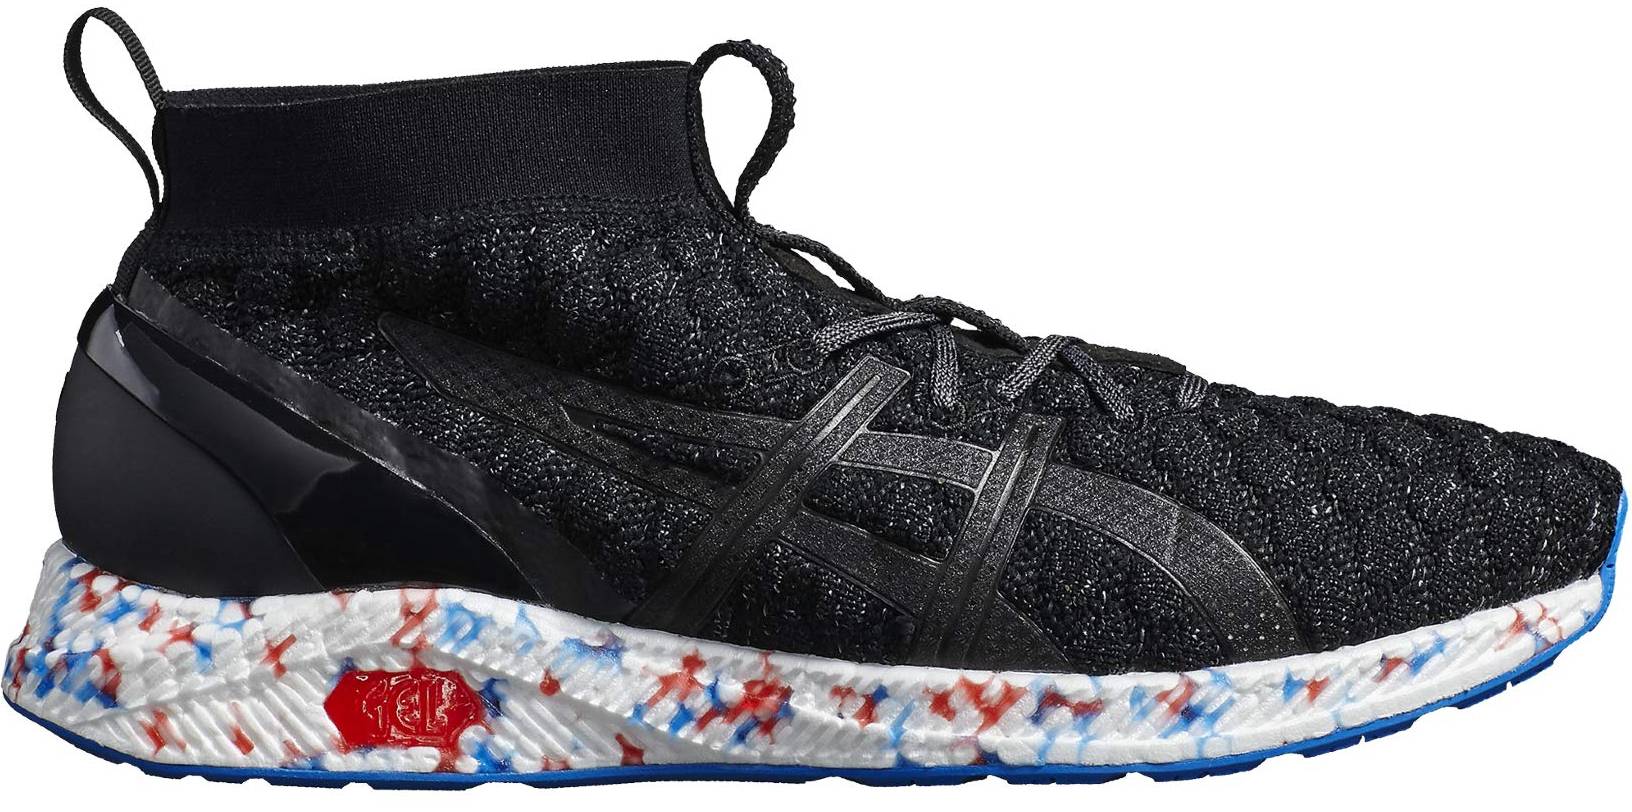 Only £70 + Review of Asics HyperGel KAN | RunRepeat